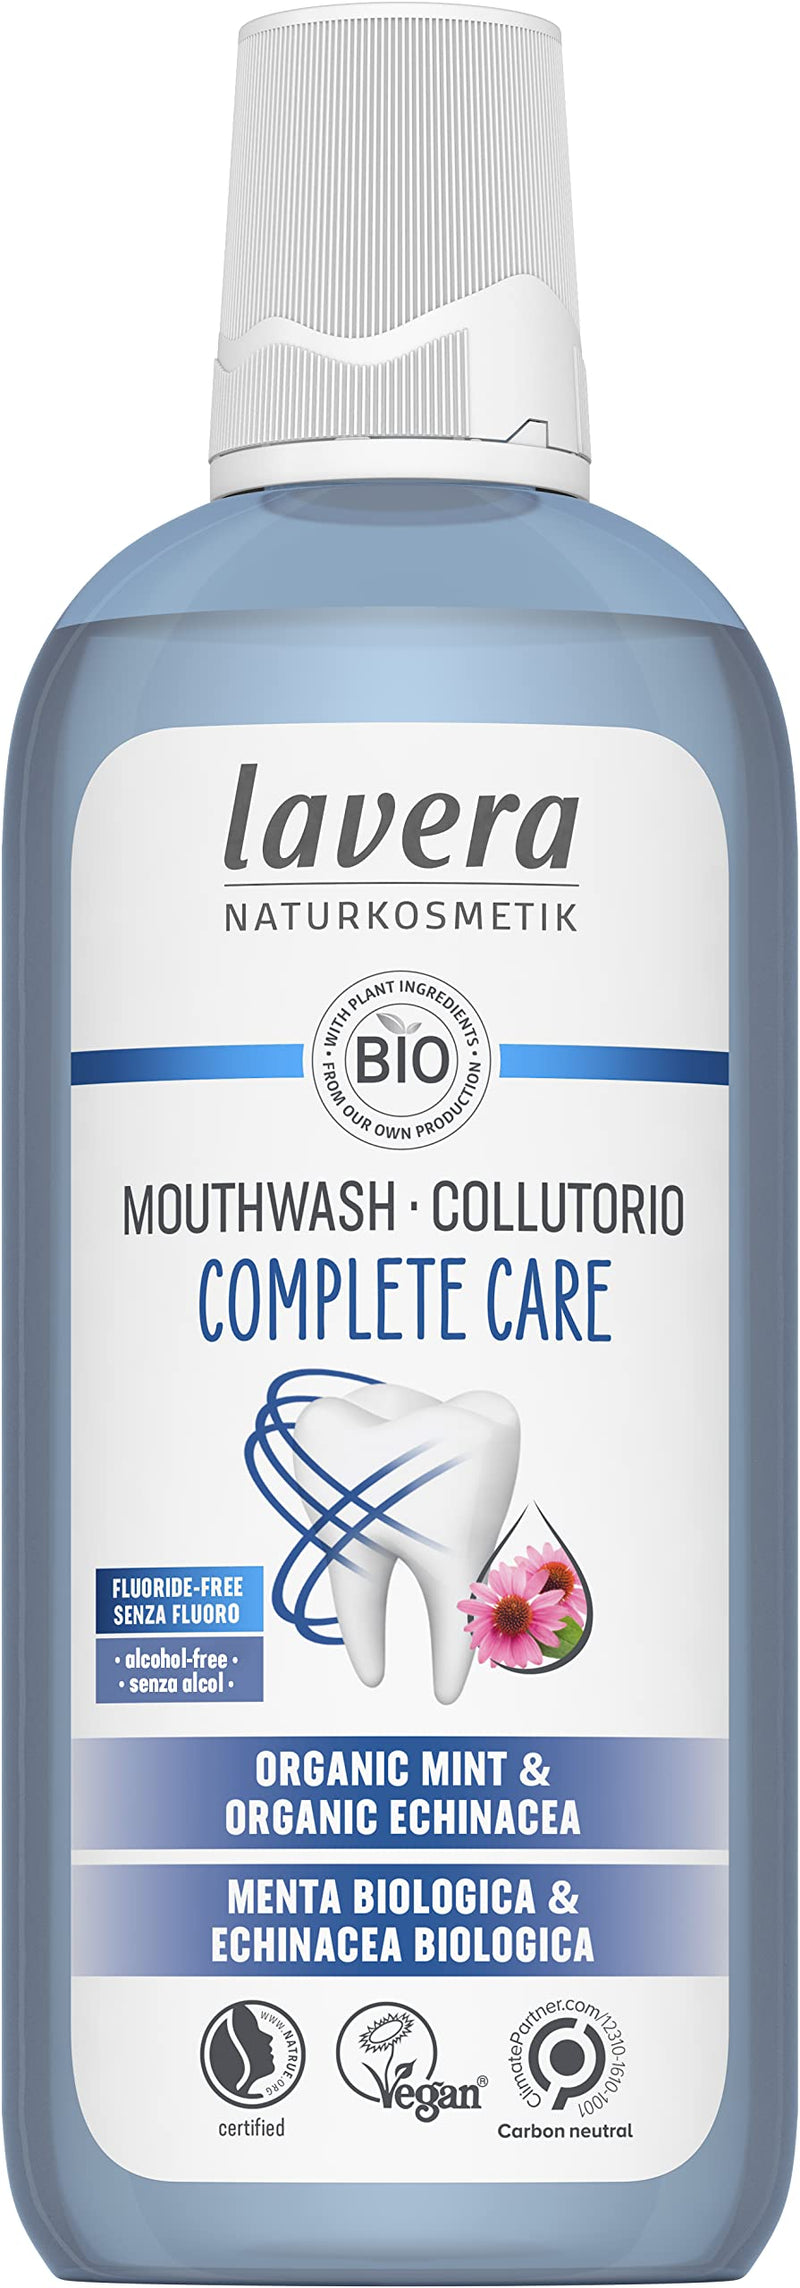 [Australia] - lavera Complete Care Mouthwash - with organic Mint & organic Echinacea - protects against tooth decay, tartar & gum desease - removes plaque - flouride- & alcohol-free - vegan - organic (1 x 400 ml) 